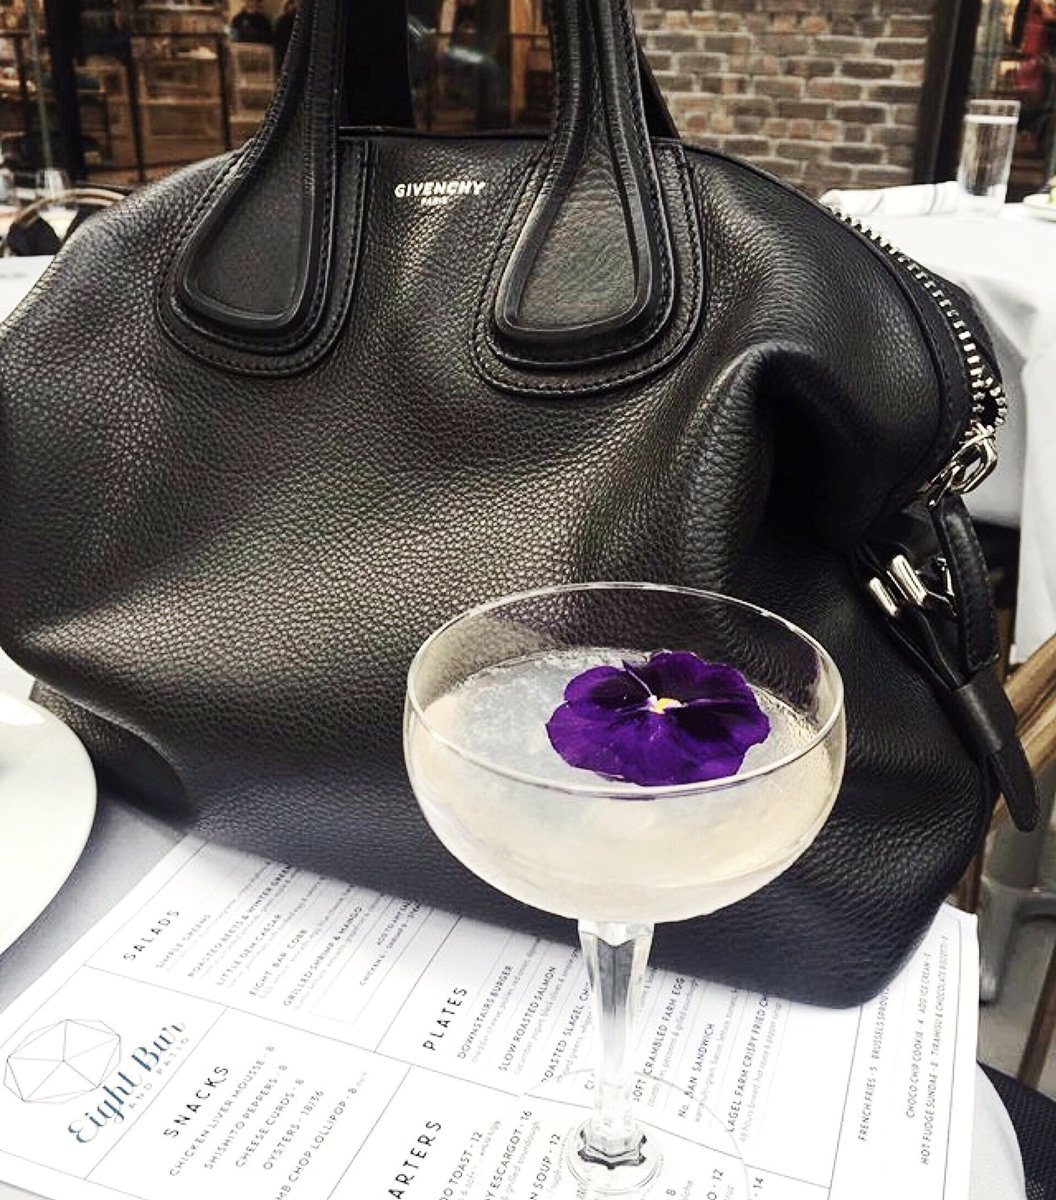 Now this is how you accessorize for Spring 🍸👜🌺 #Chicago #GoldCoast #chicagofood #chicagobars #chicagopatio #spring #cocktails #cocktail